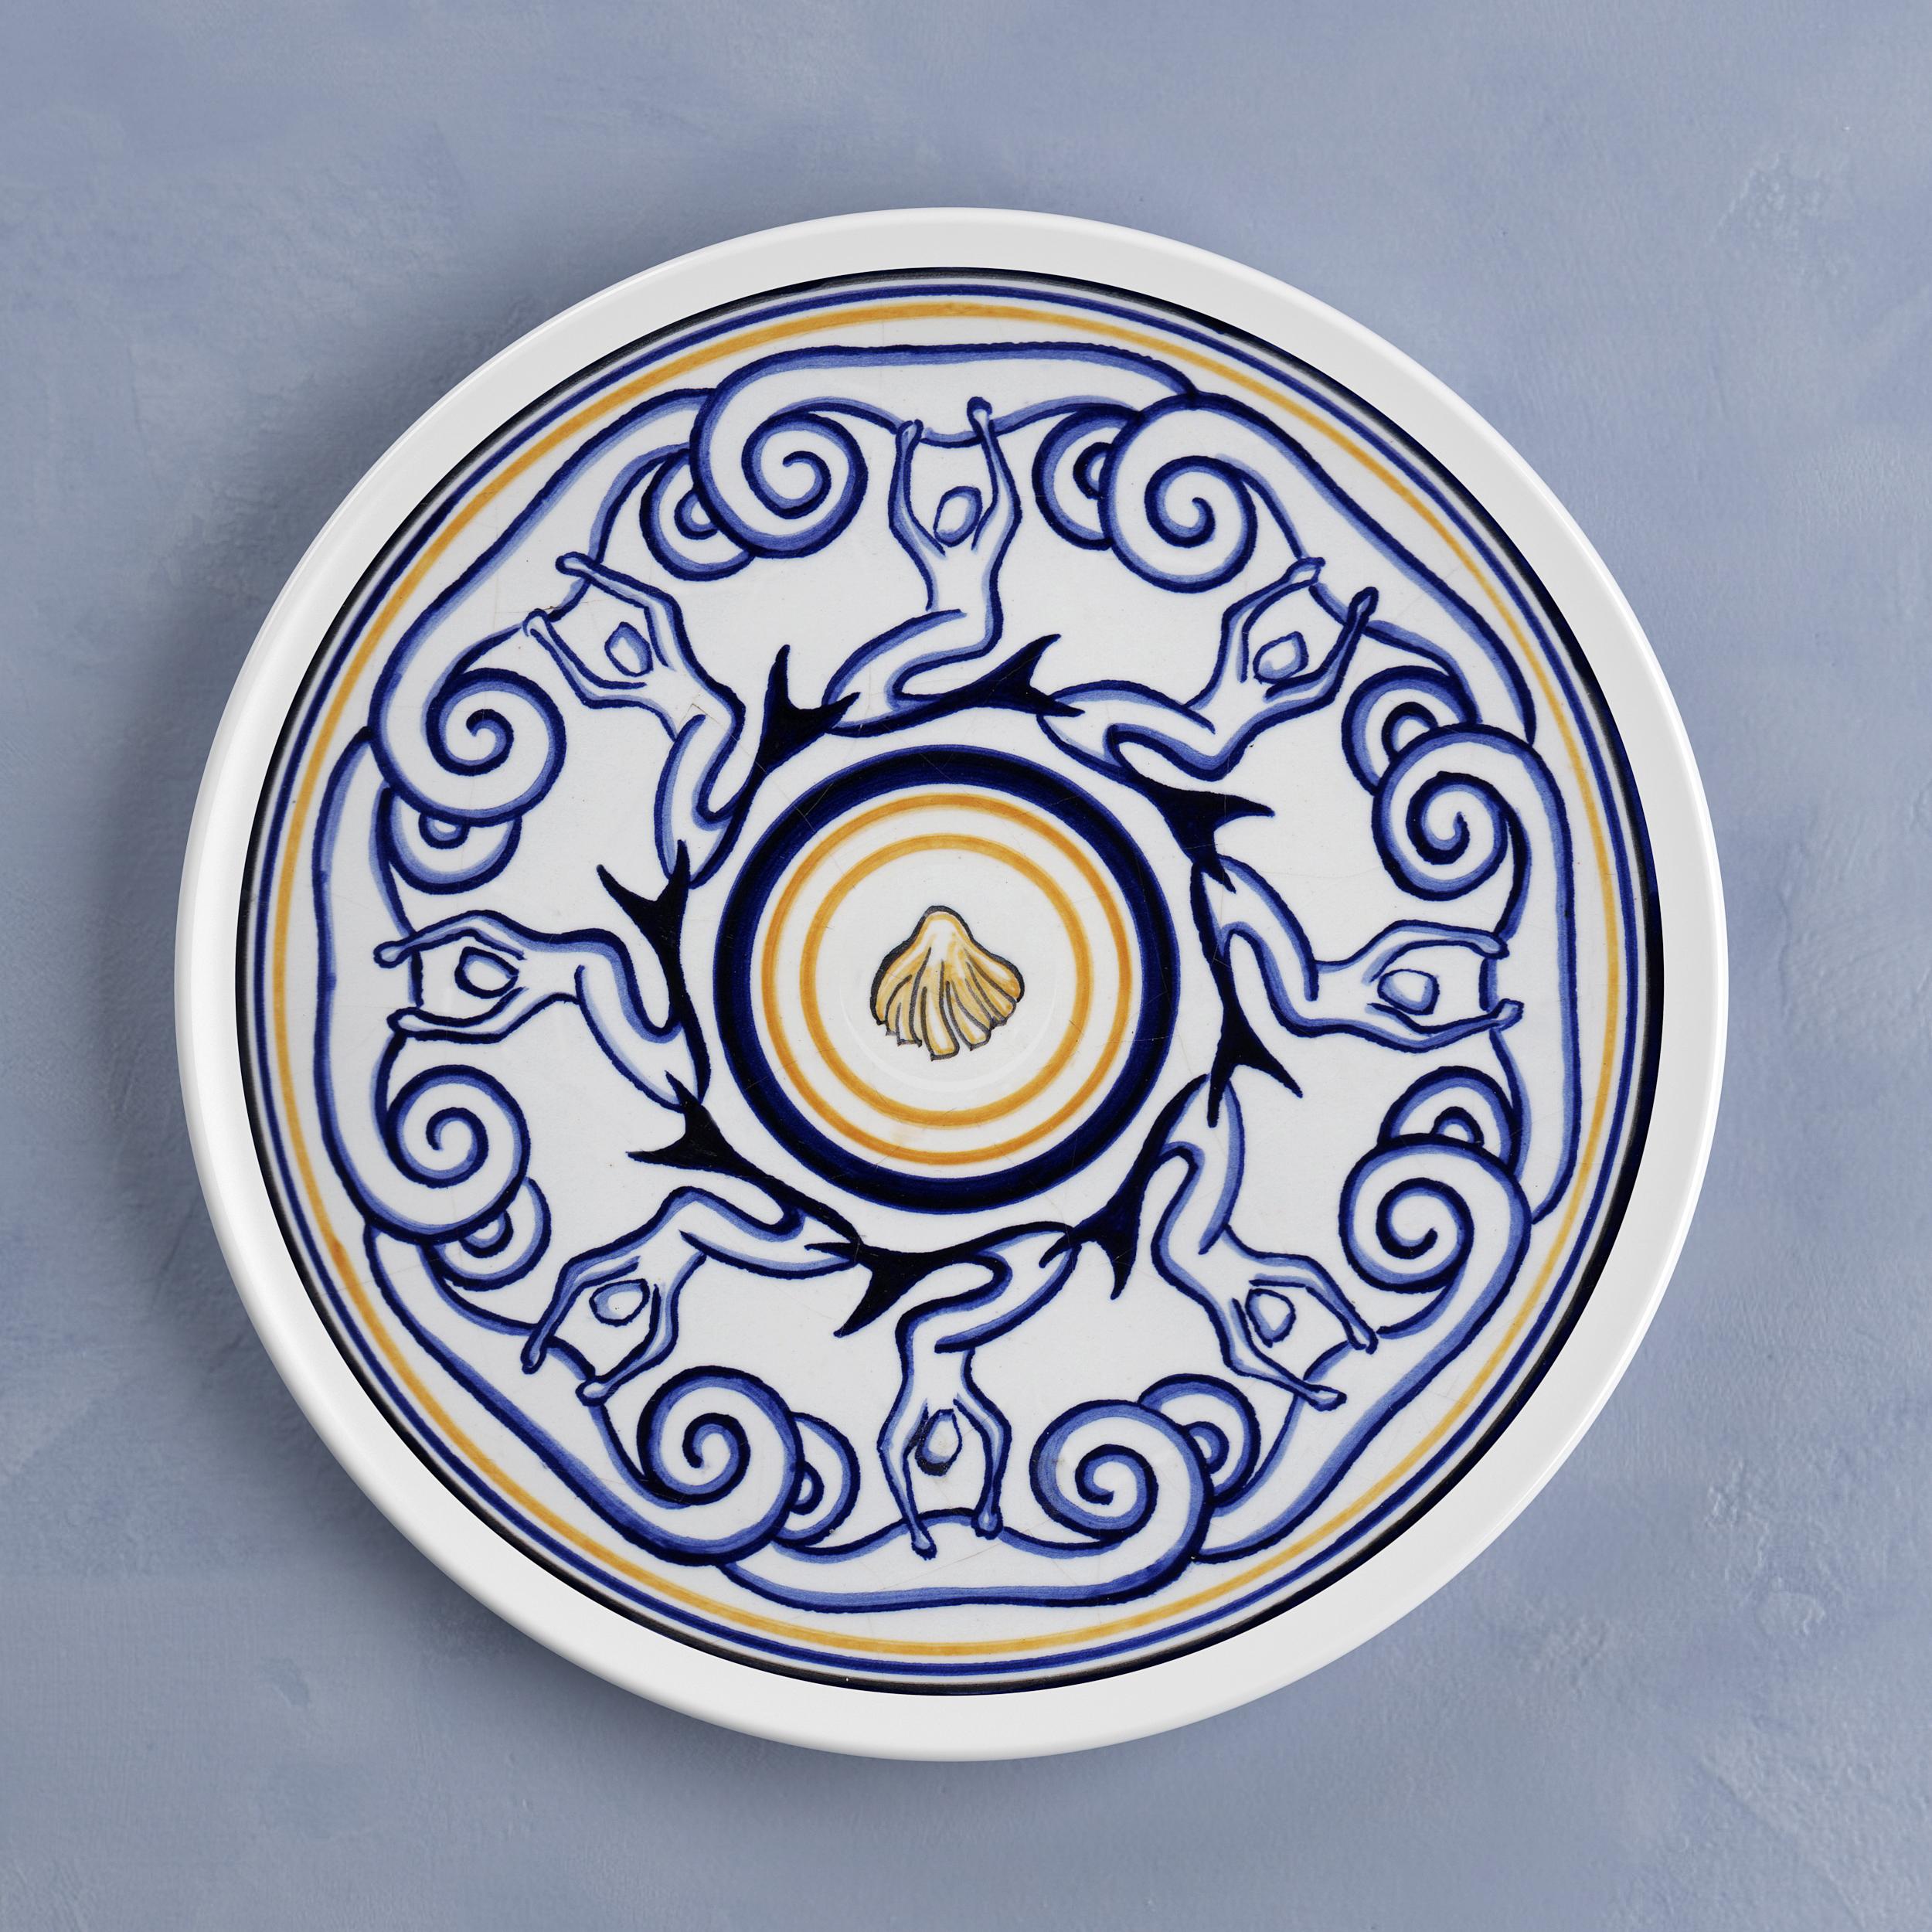 Beautiful handcrafted dinner plate by Crisodora will make an elegant statement with sophisticated art de la table for every occasion.

Sicilian clay, hand painted.

Made in Sicily (Italy) by Master Artisans.